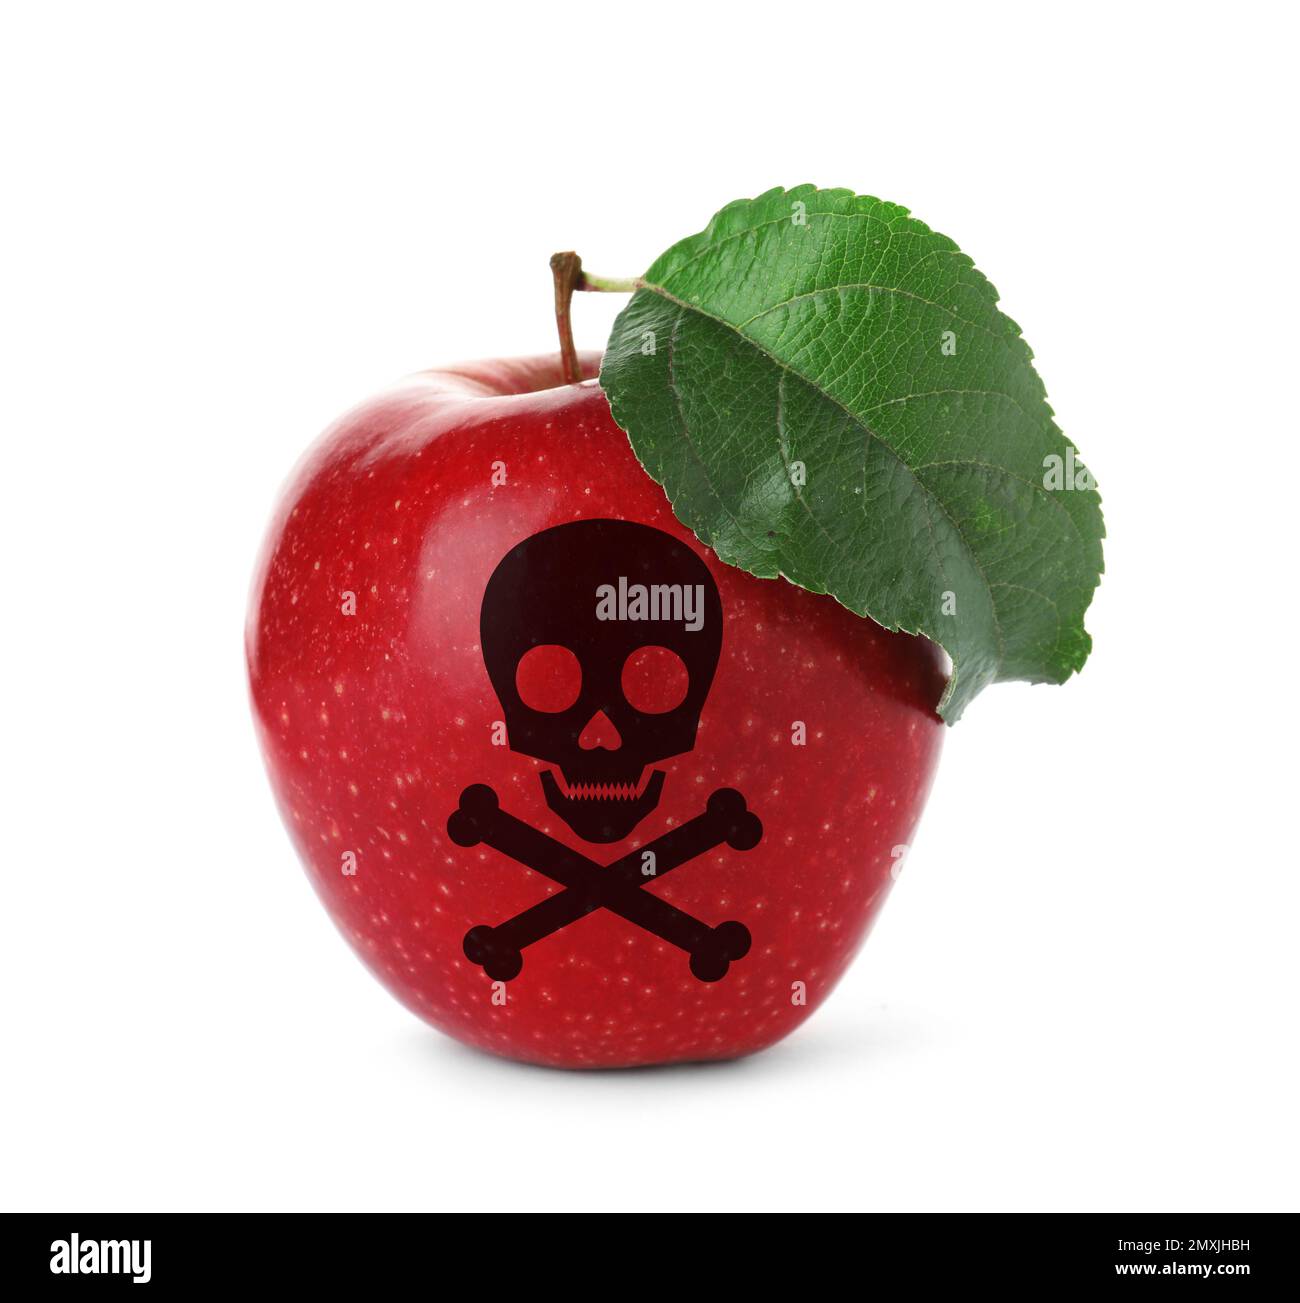 Red poison apple with skull and crossbones image on white background Stock Photo